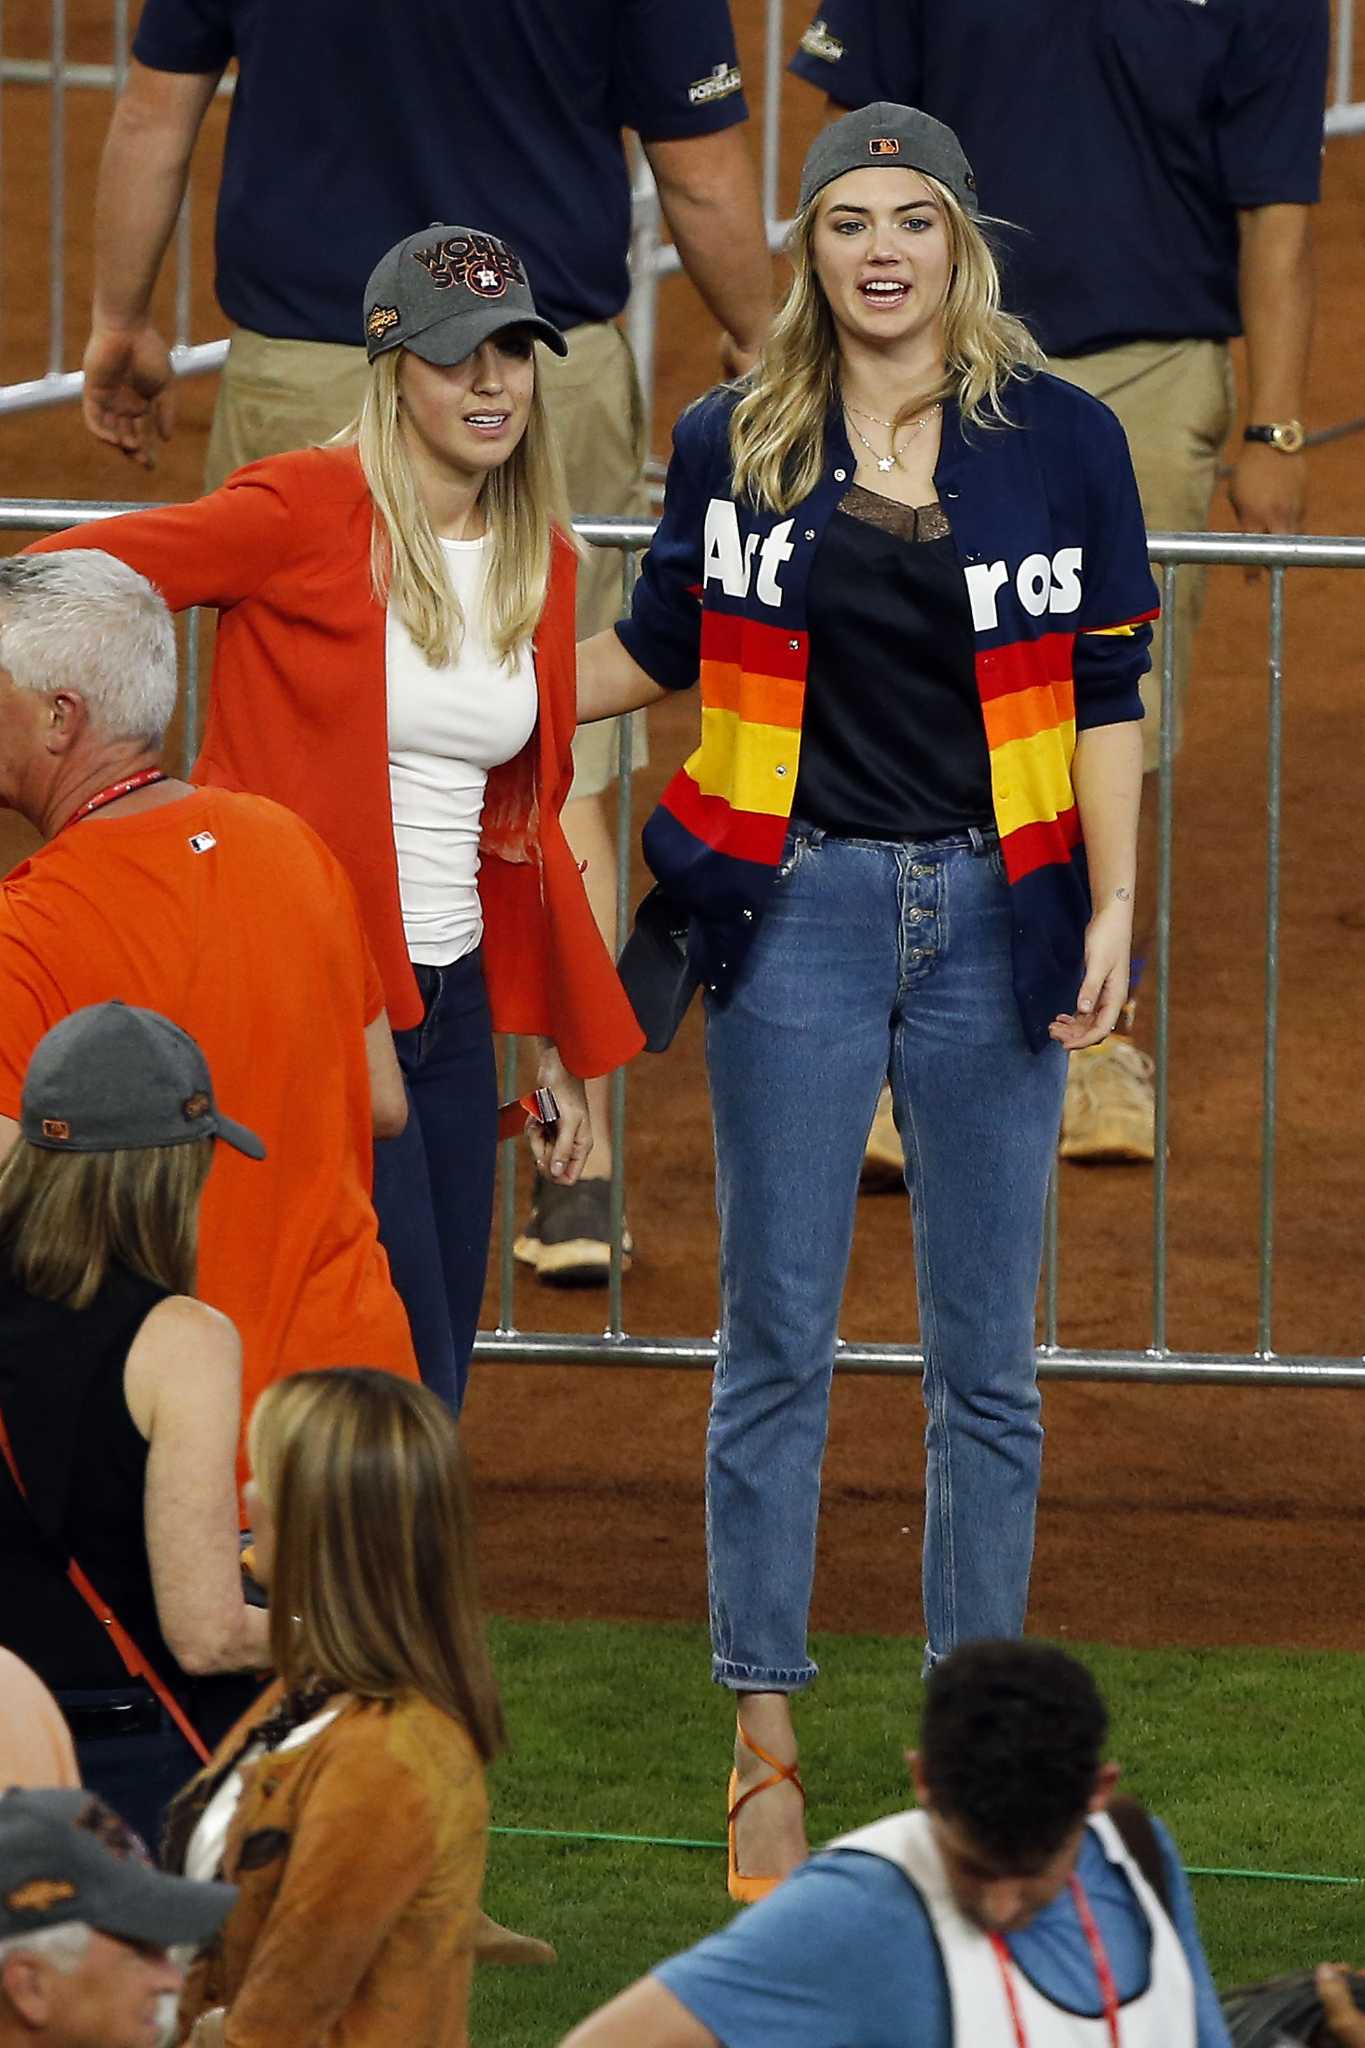 The Kate Upton Astros sweater isn't just for women